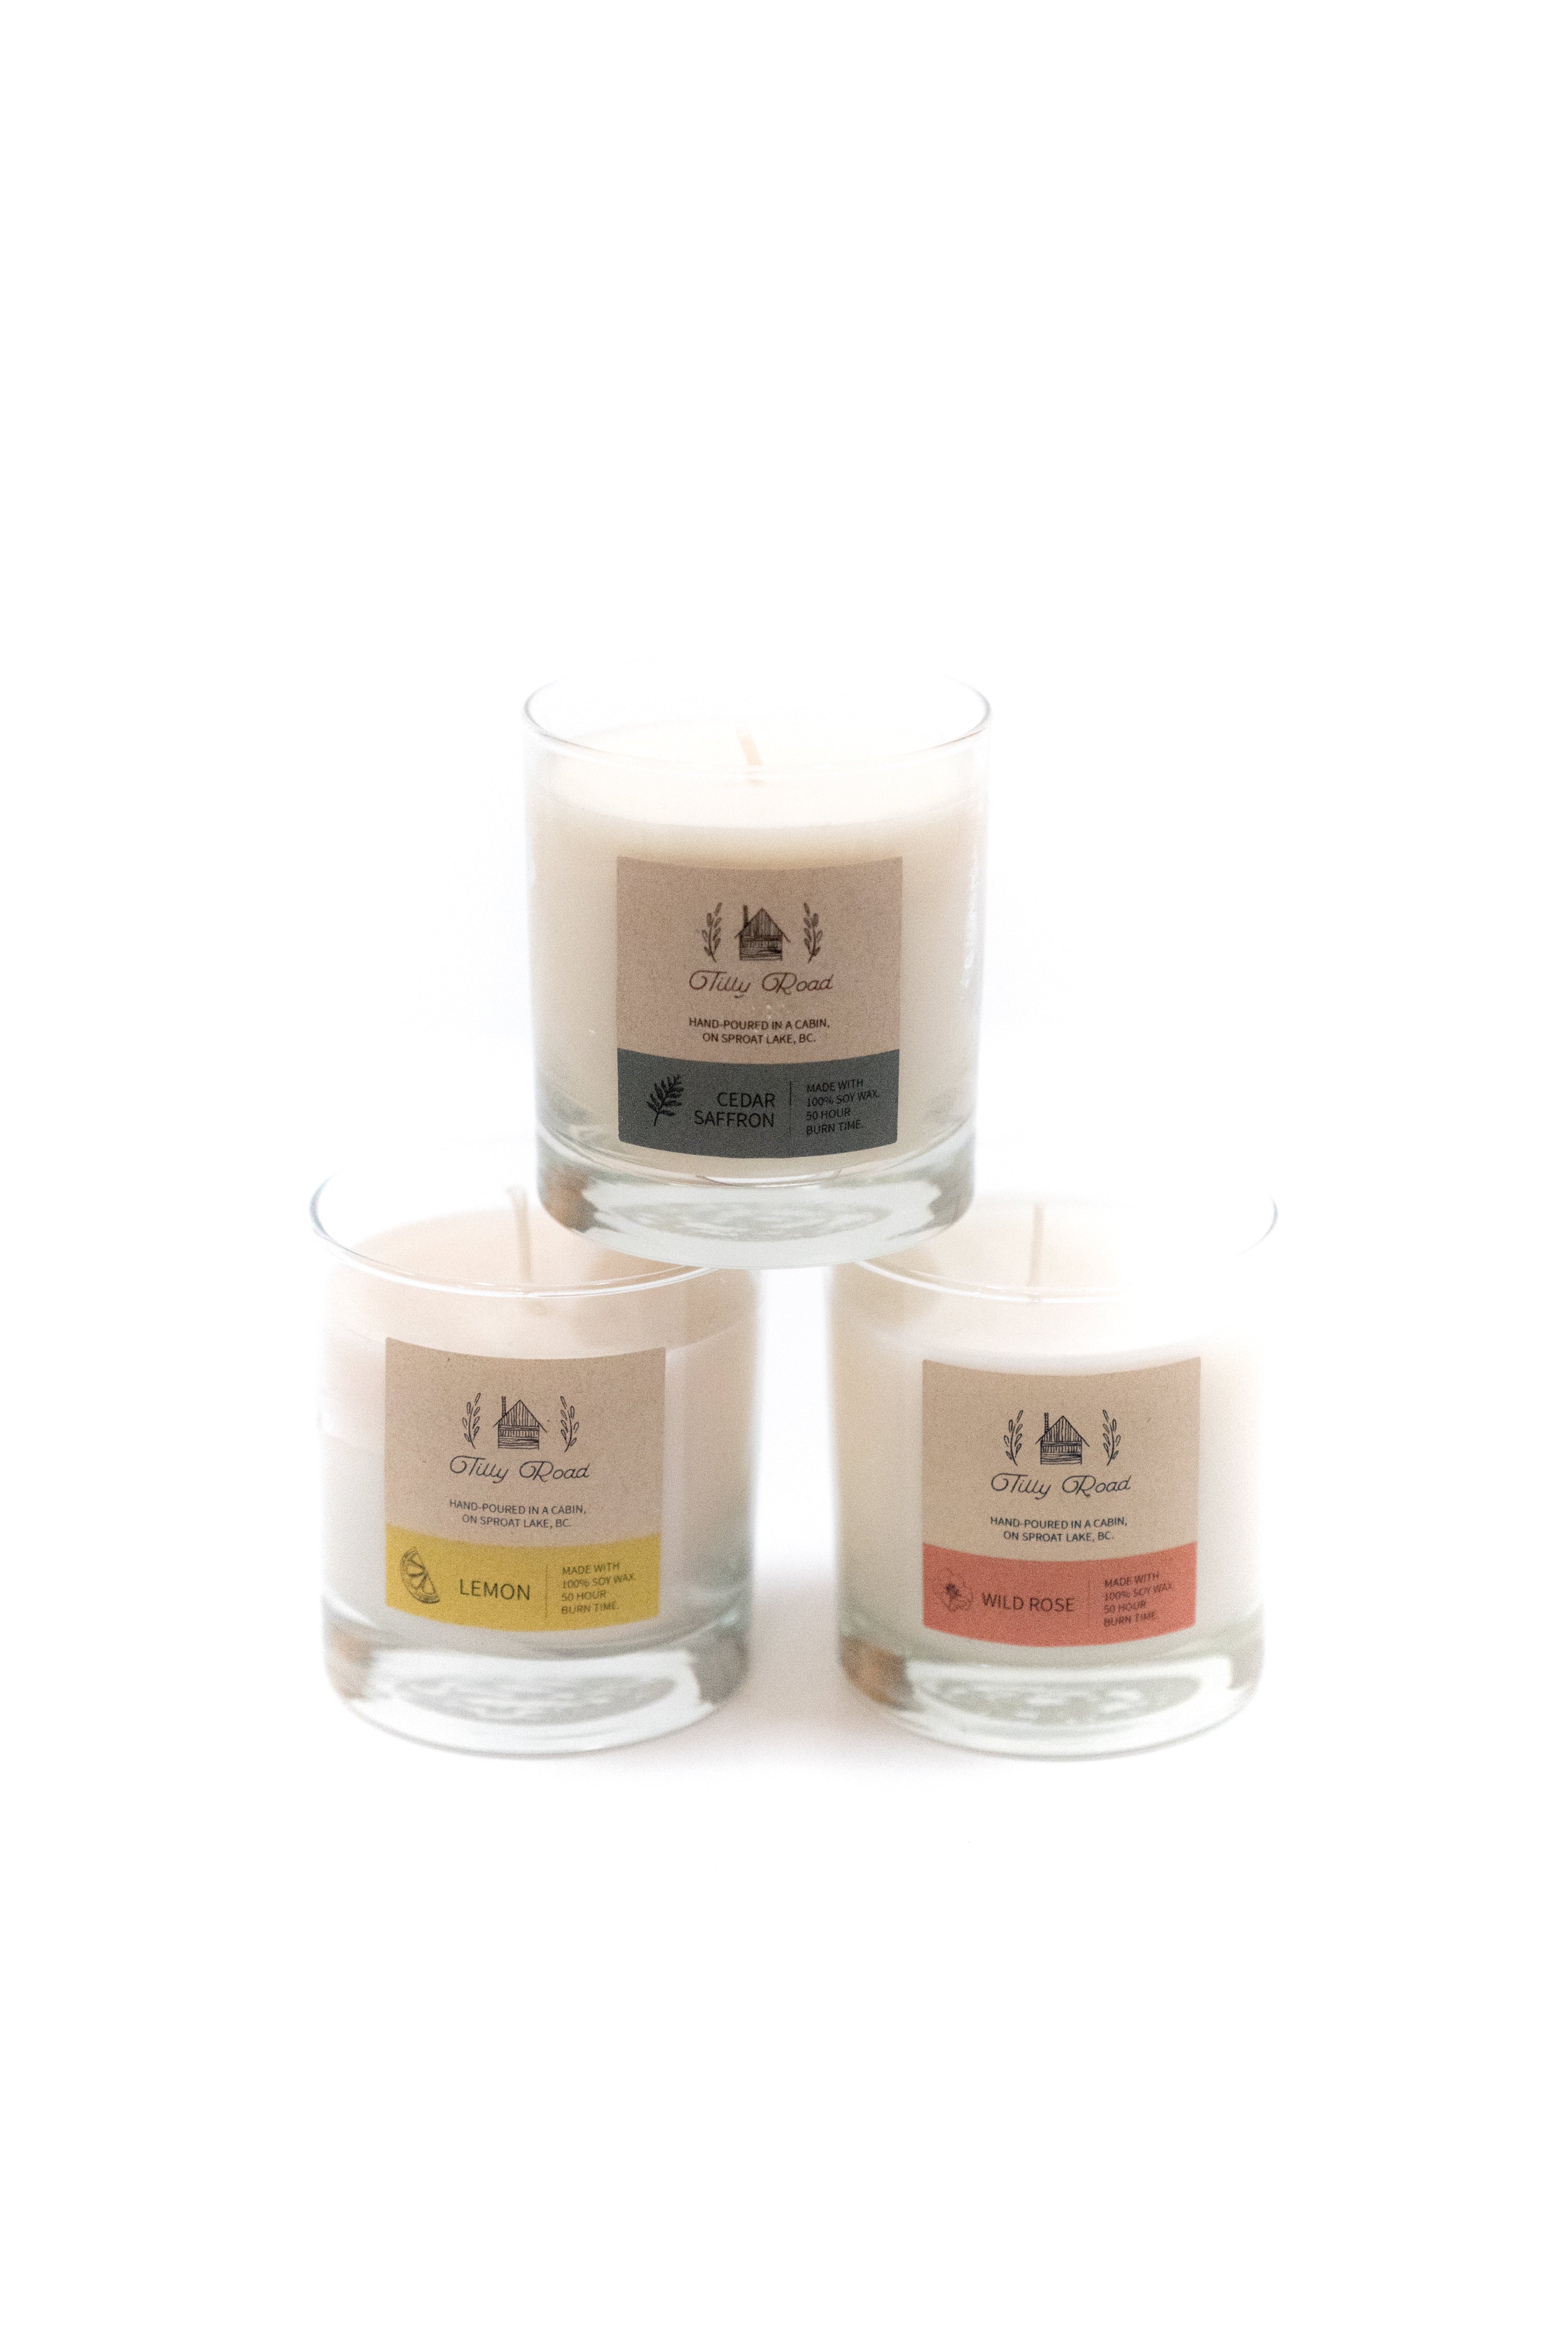 Tilly Road Candles